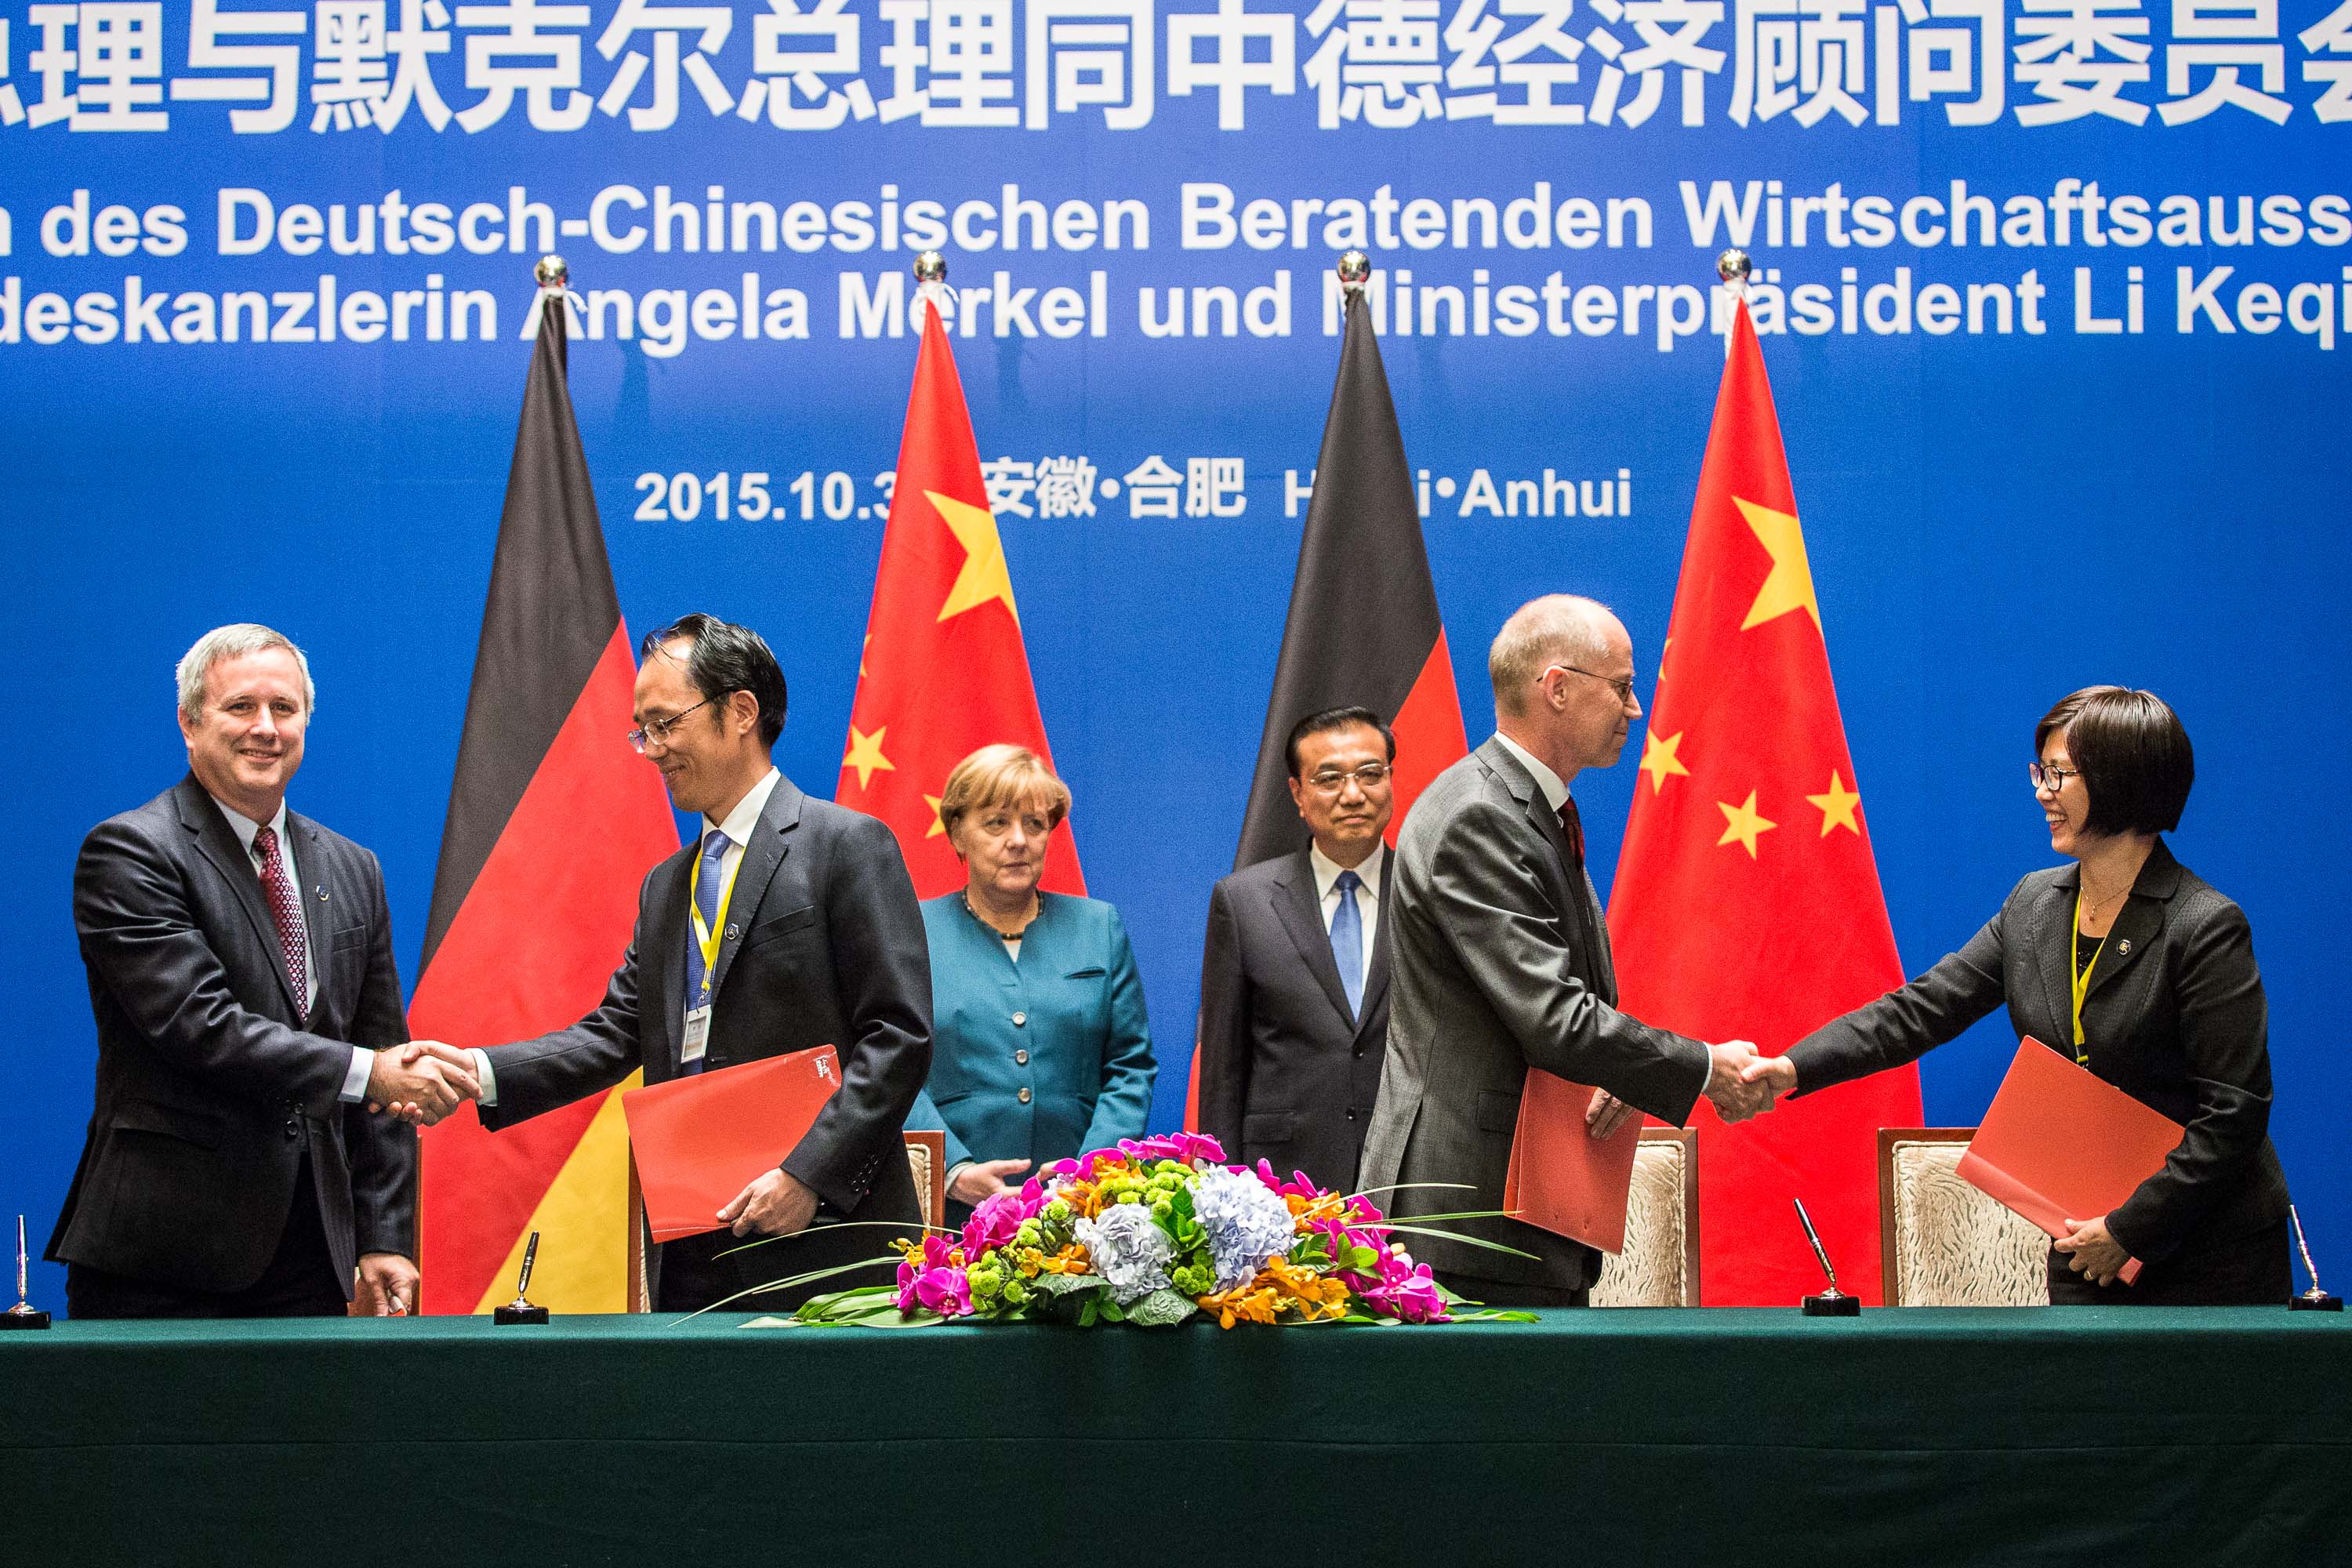 The signing ceremony of the cooperation agreement between UFZ and CLMA took place during the visit of the German Chancellor Angela Merkel in China.